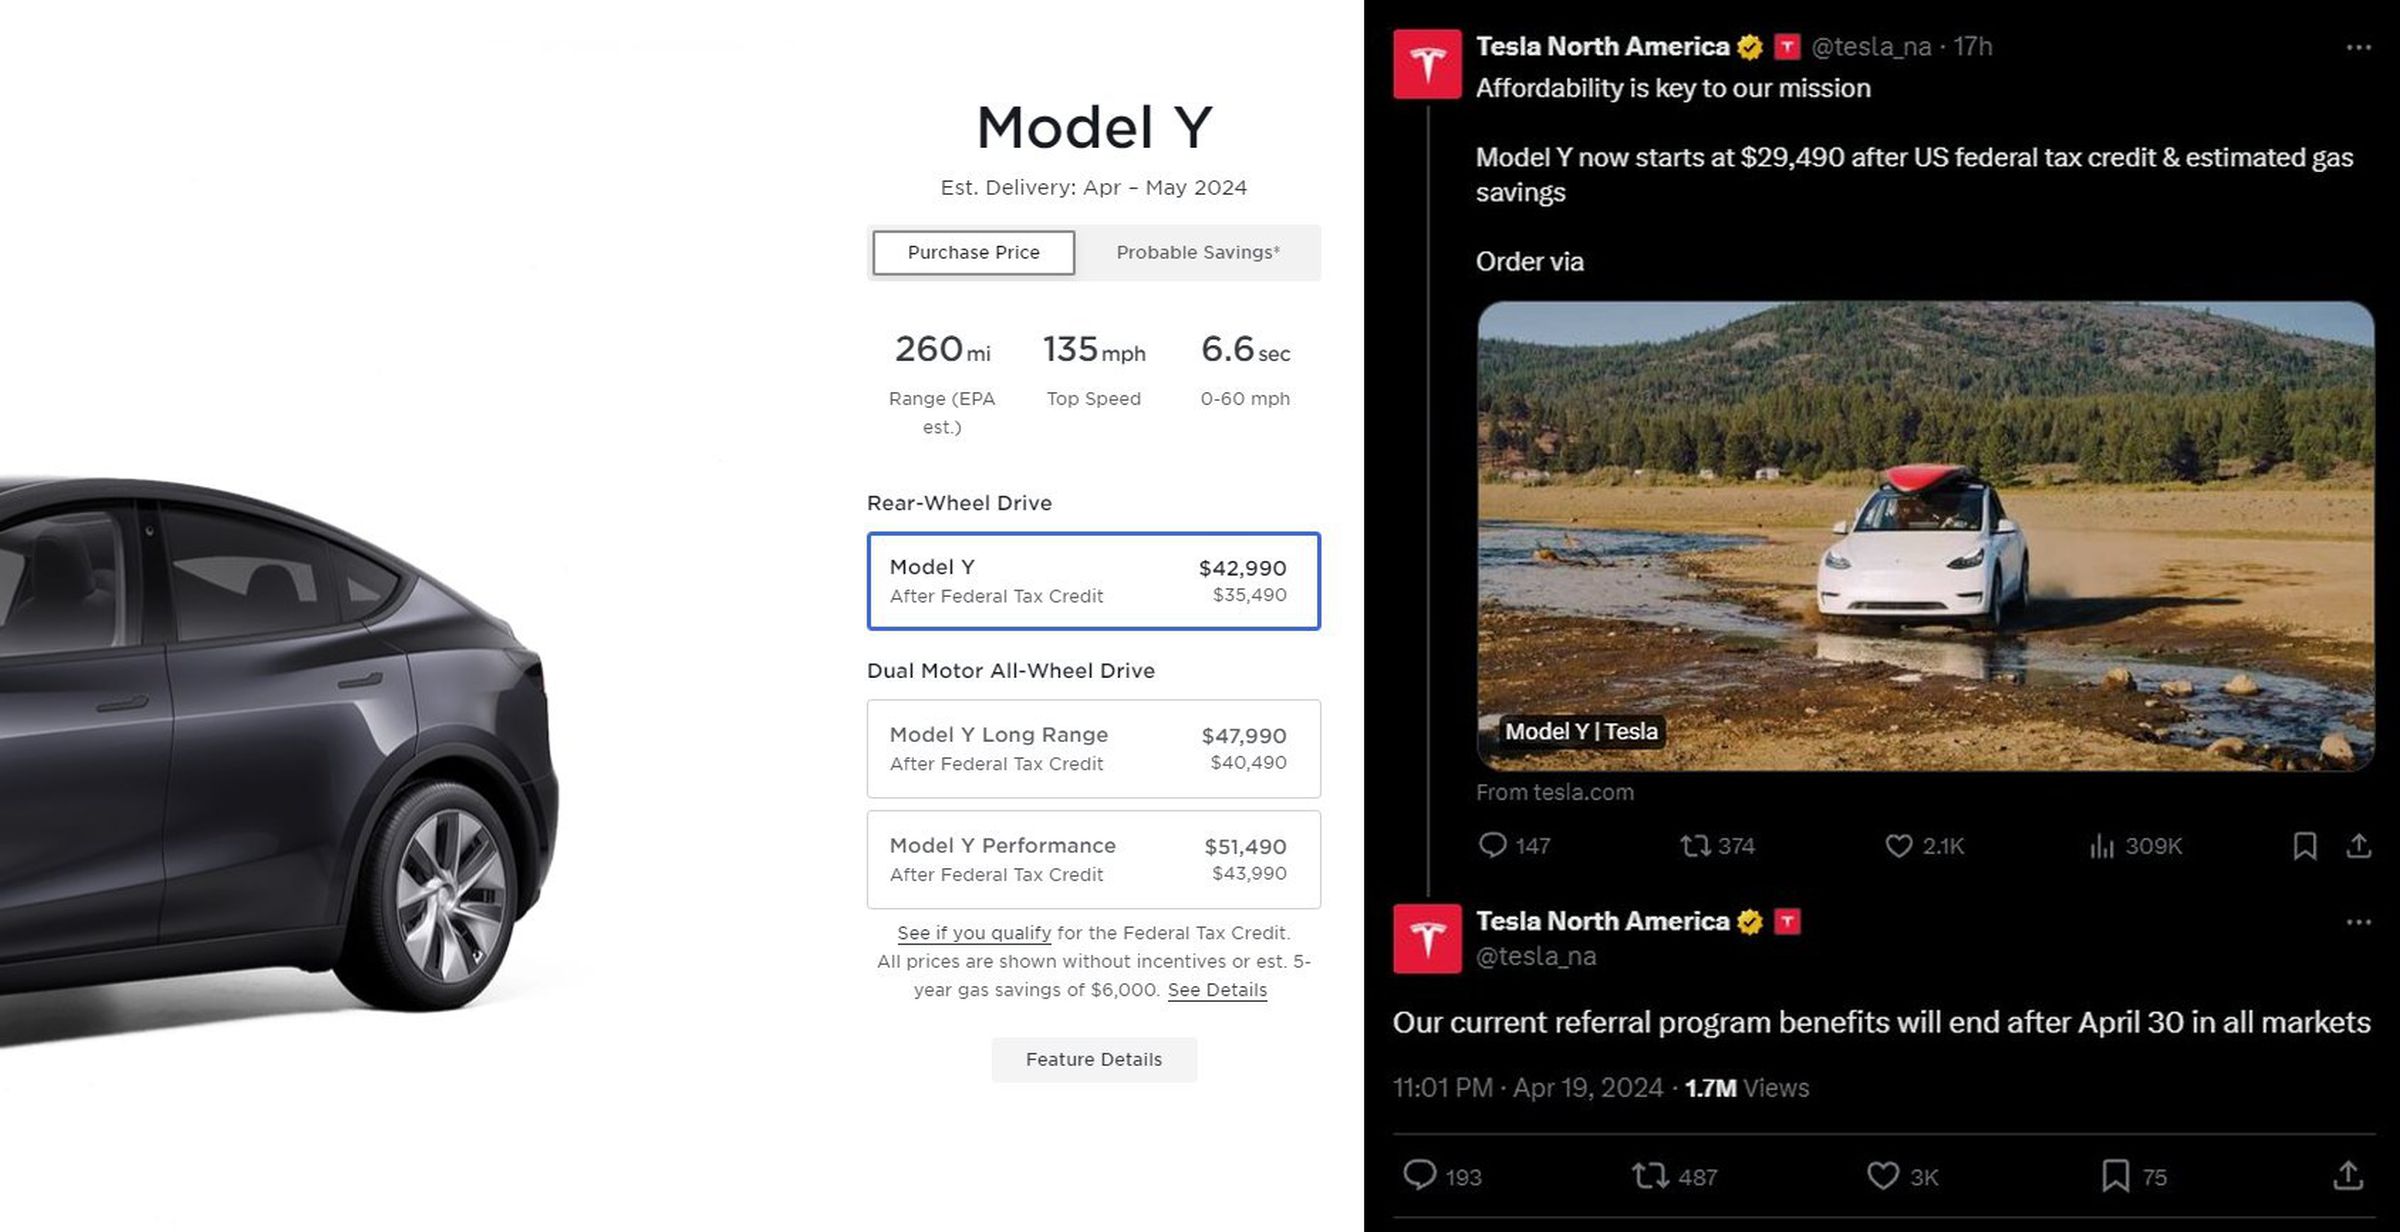 Composite picture showing the actual price of a Model Y on Tesla.com ($42,990), and tweets from Tesla announcing a price drop with credits and savings included along with a post saying referral program benefits will end after April 30.